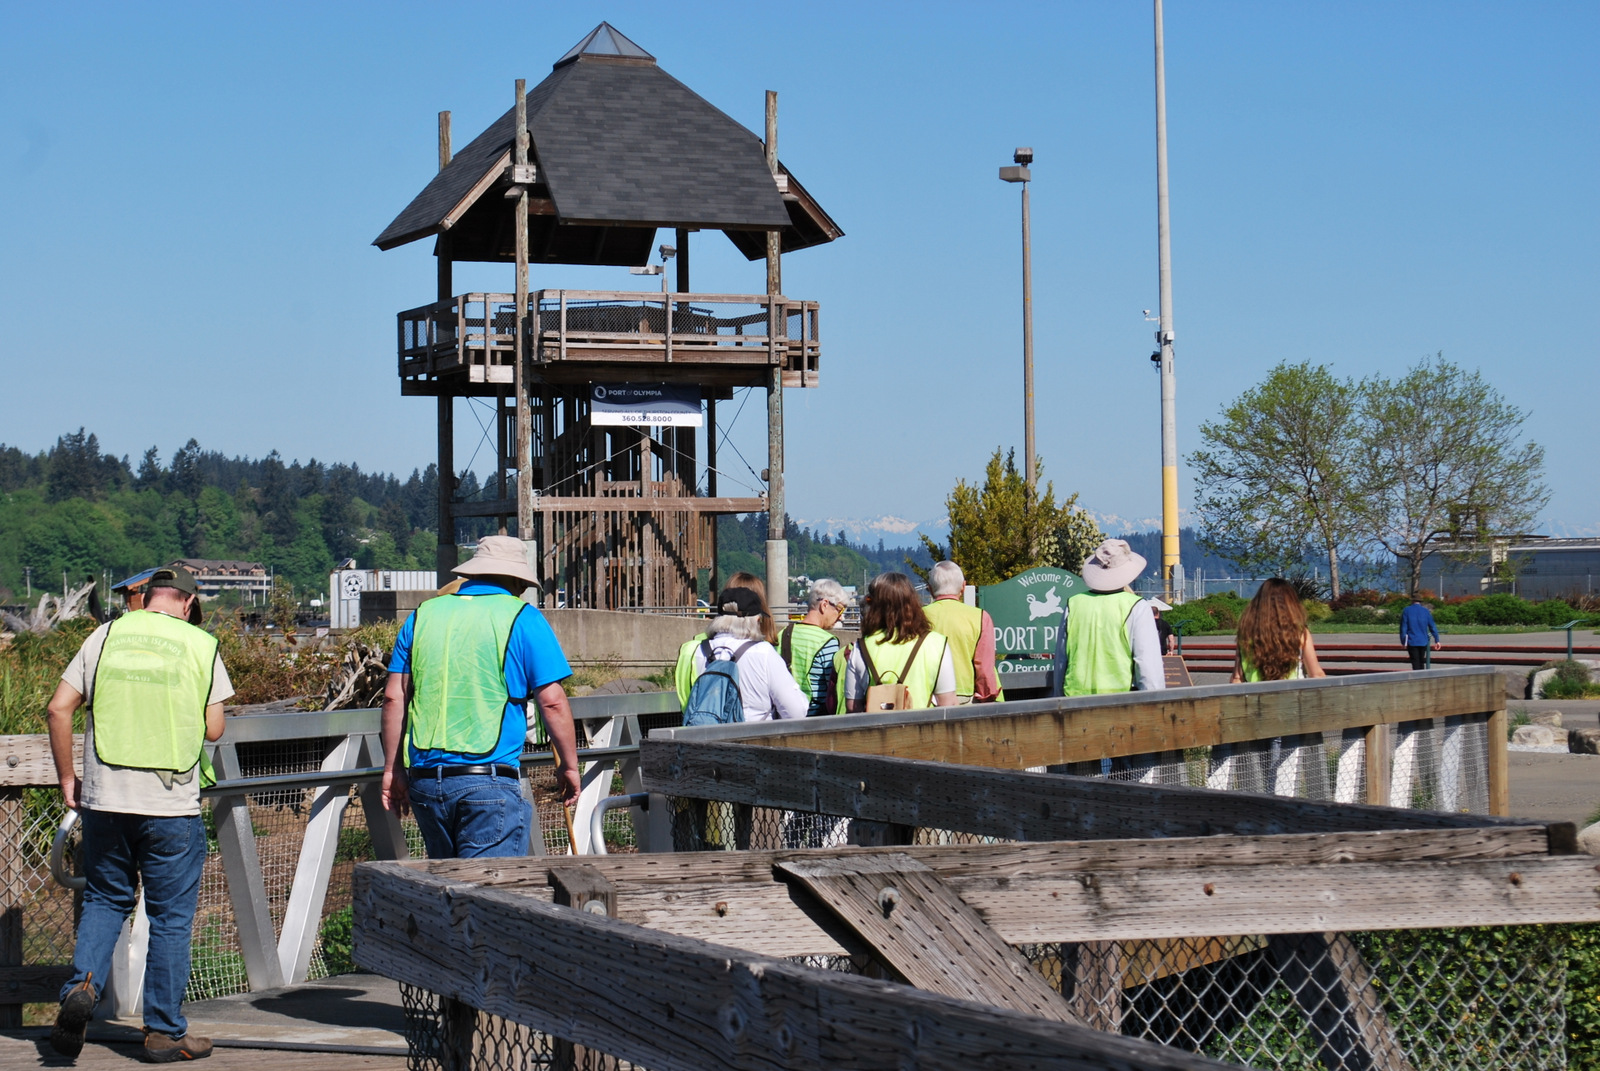 Go Behind the Gates at a Port of Olympia Tour - ThurstonTalk